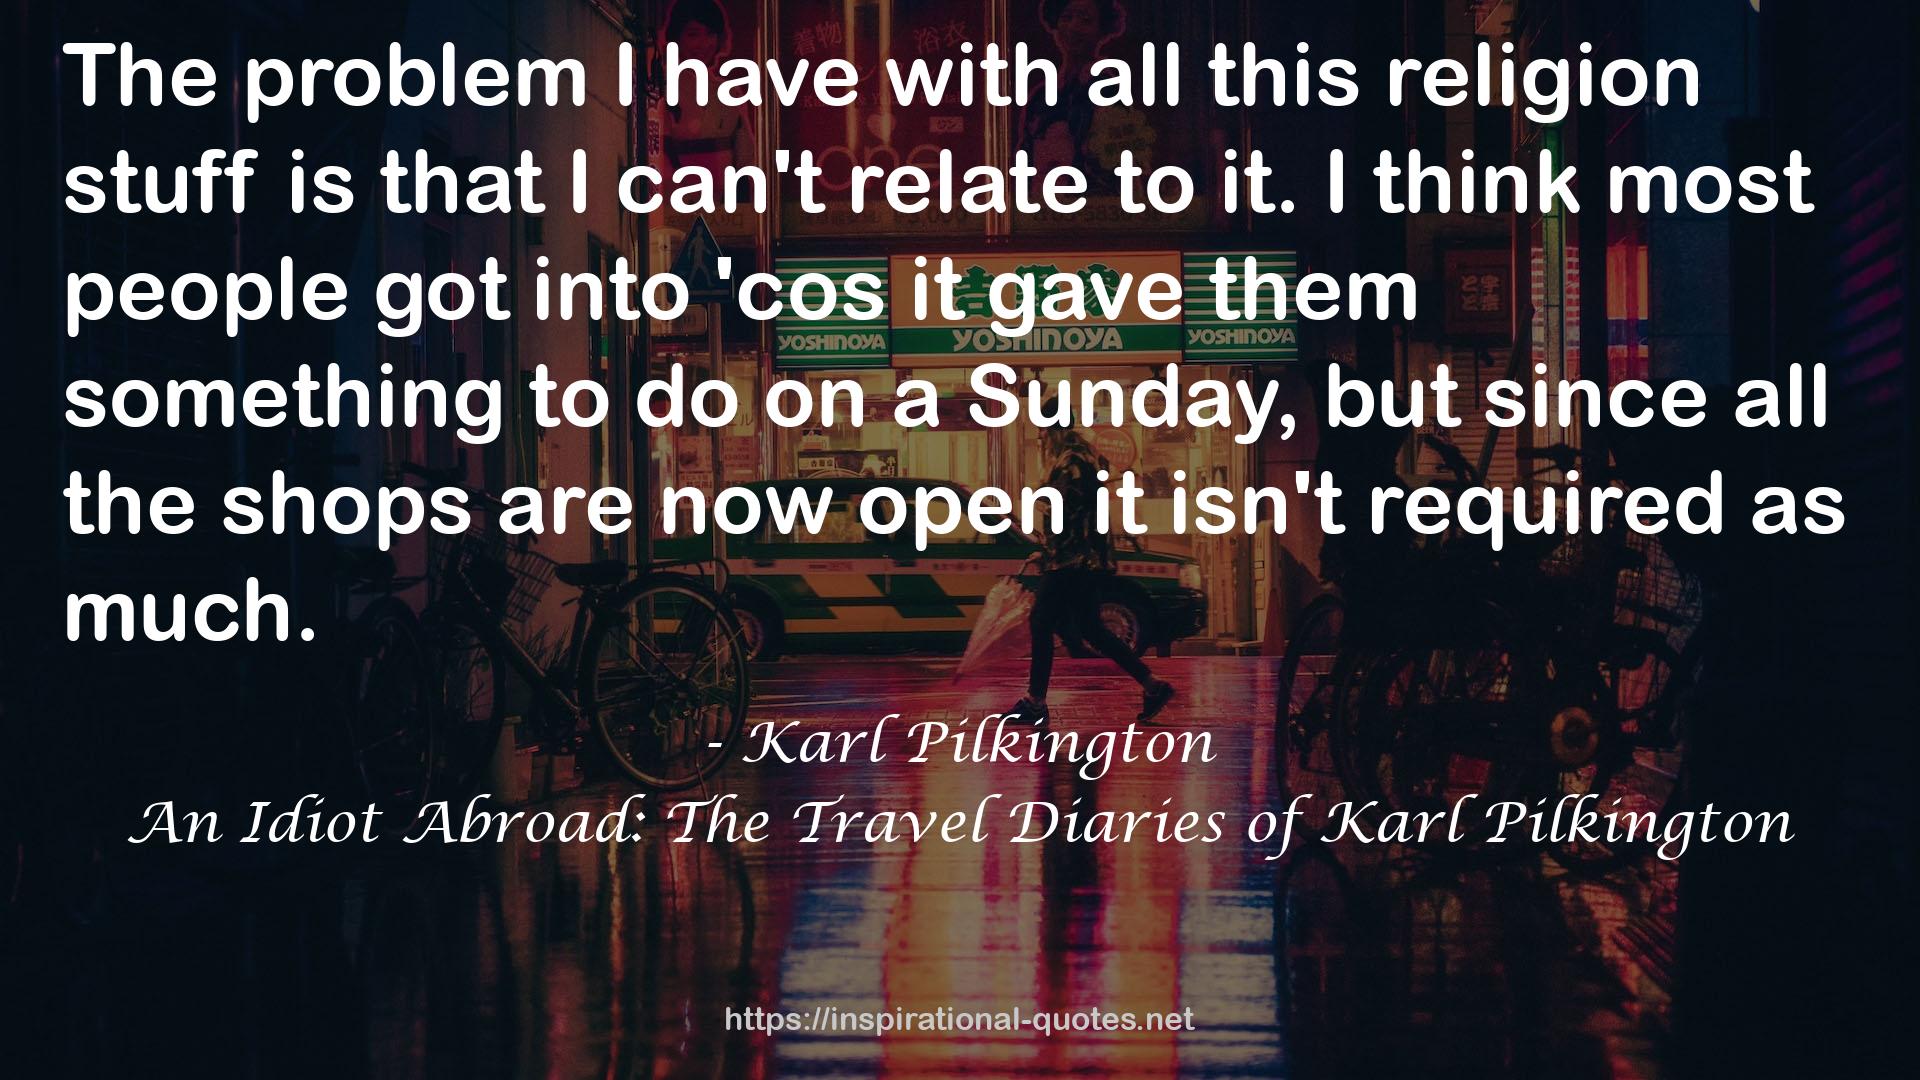 An Idiot Abroad: The Travel Diaries of Karl Pilkington QUOTES